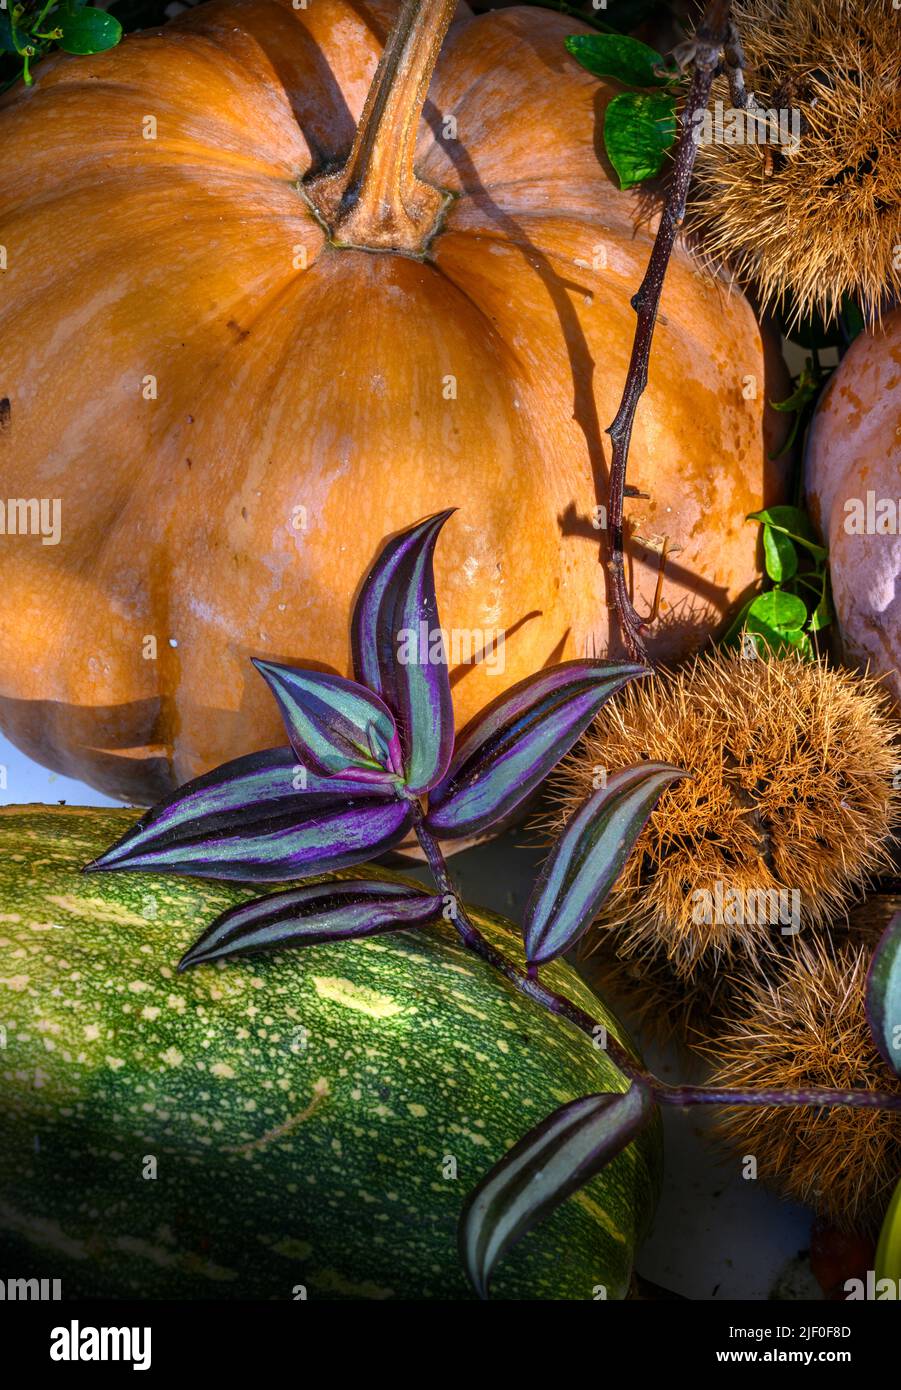 Still life arrangement of a pumpkin, marrow and other squashes with Tradescantia zebrina leaves and chestnuts in their casings. Stock Photo